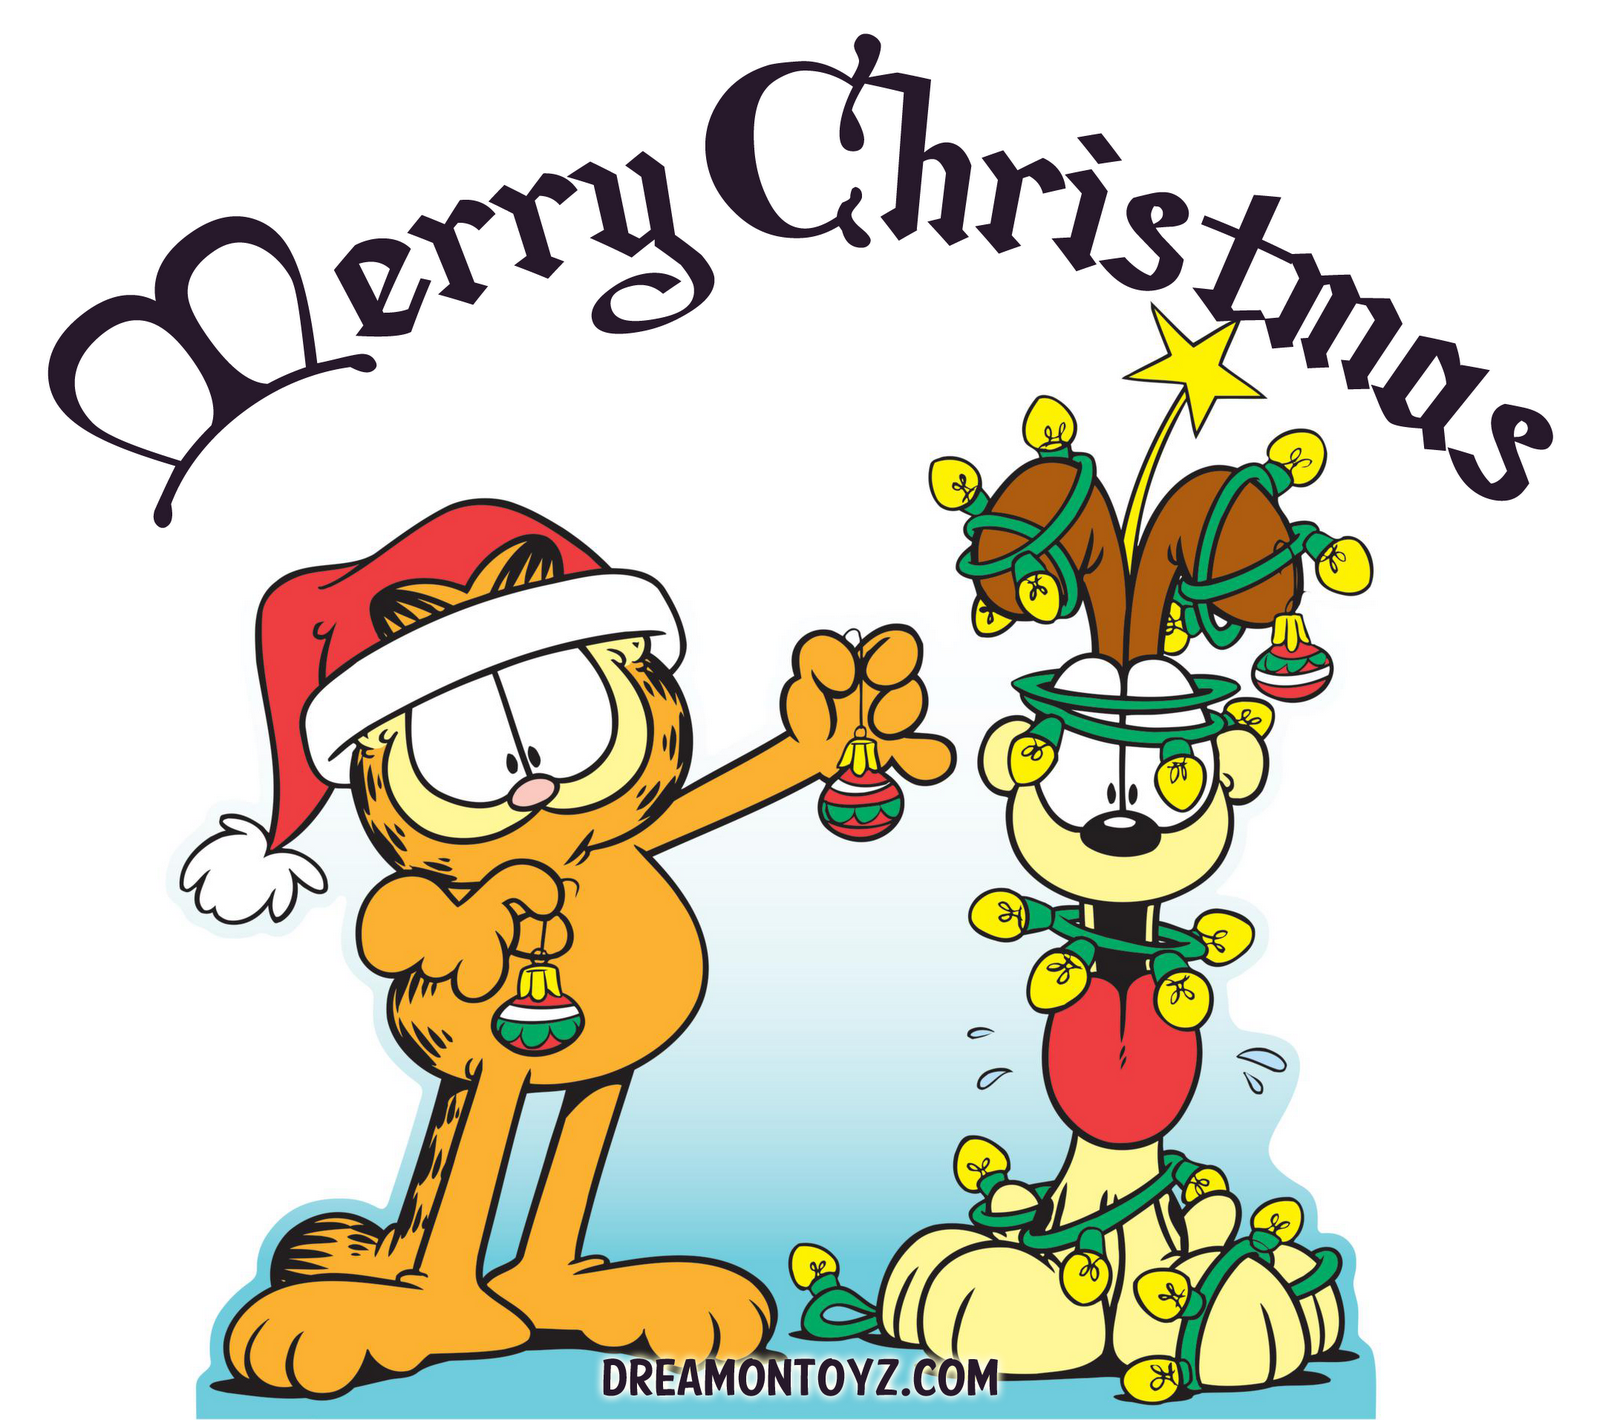 Merry Christmas Cartoon Images | Free Download Clip Art | Free ...